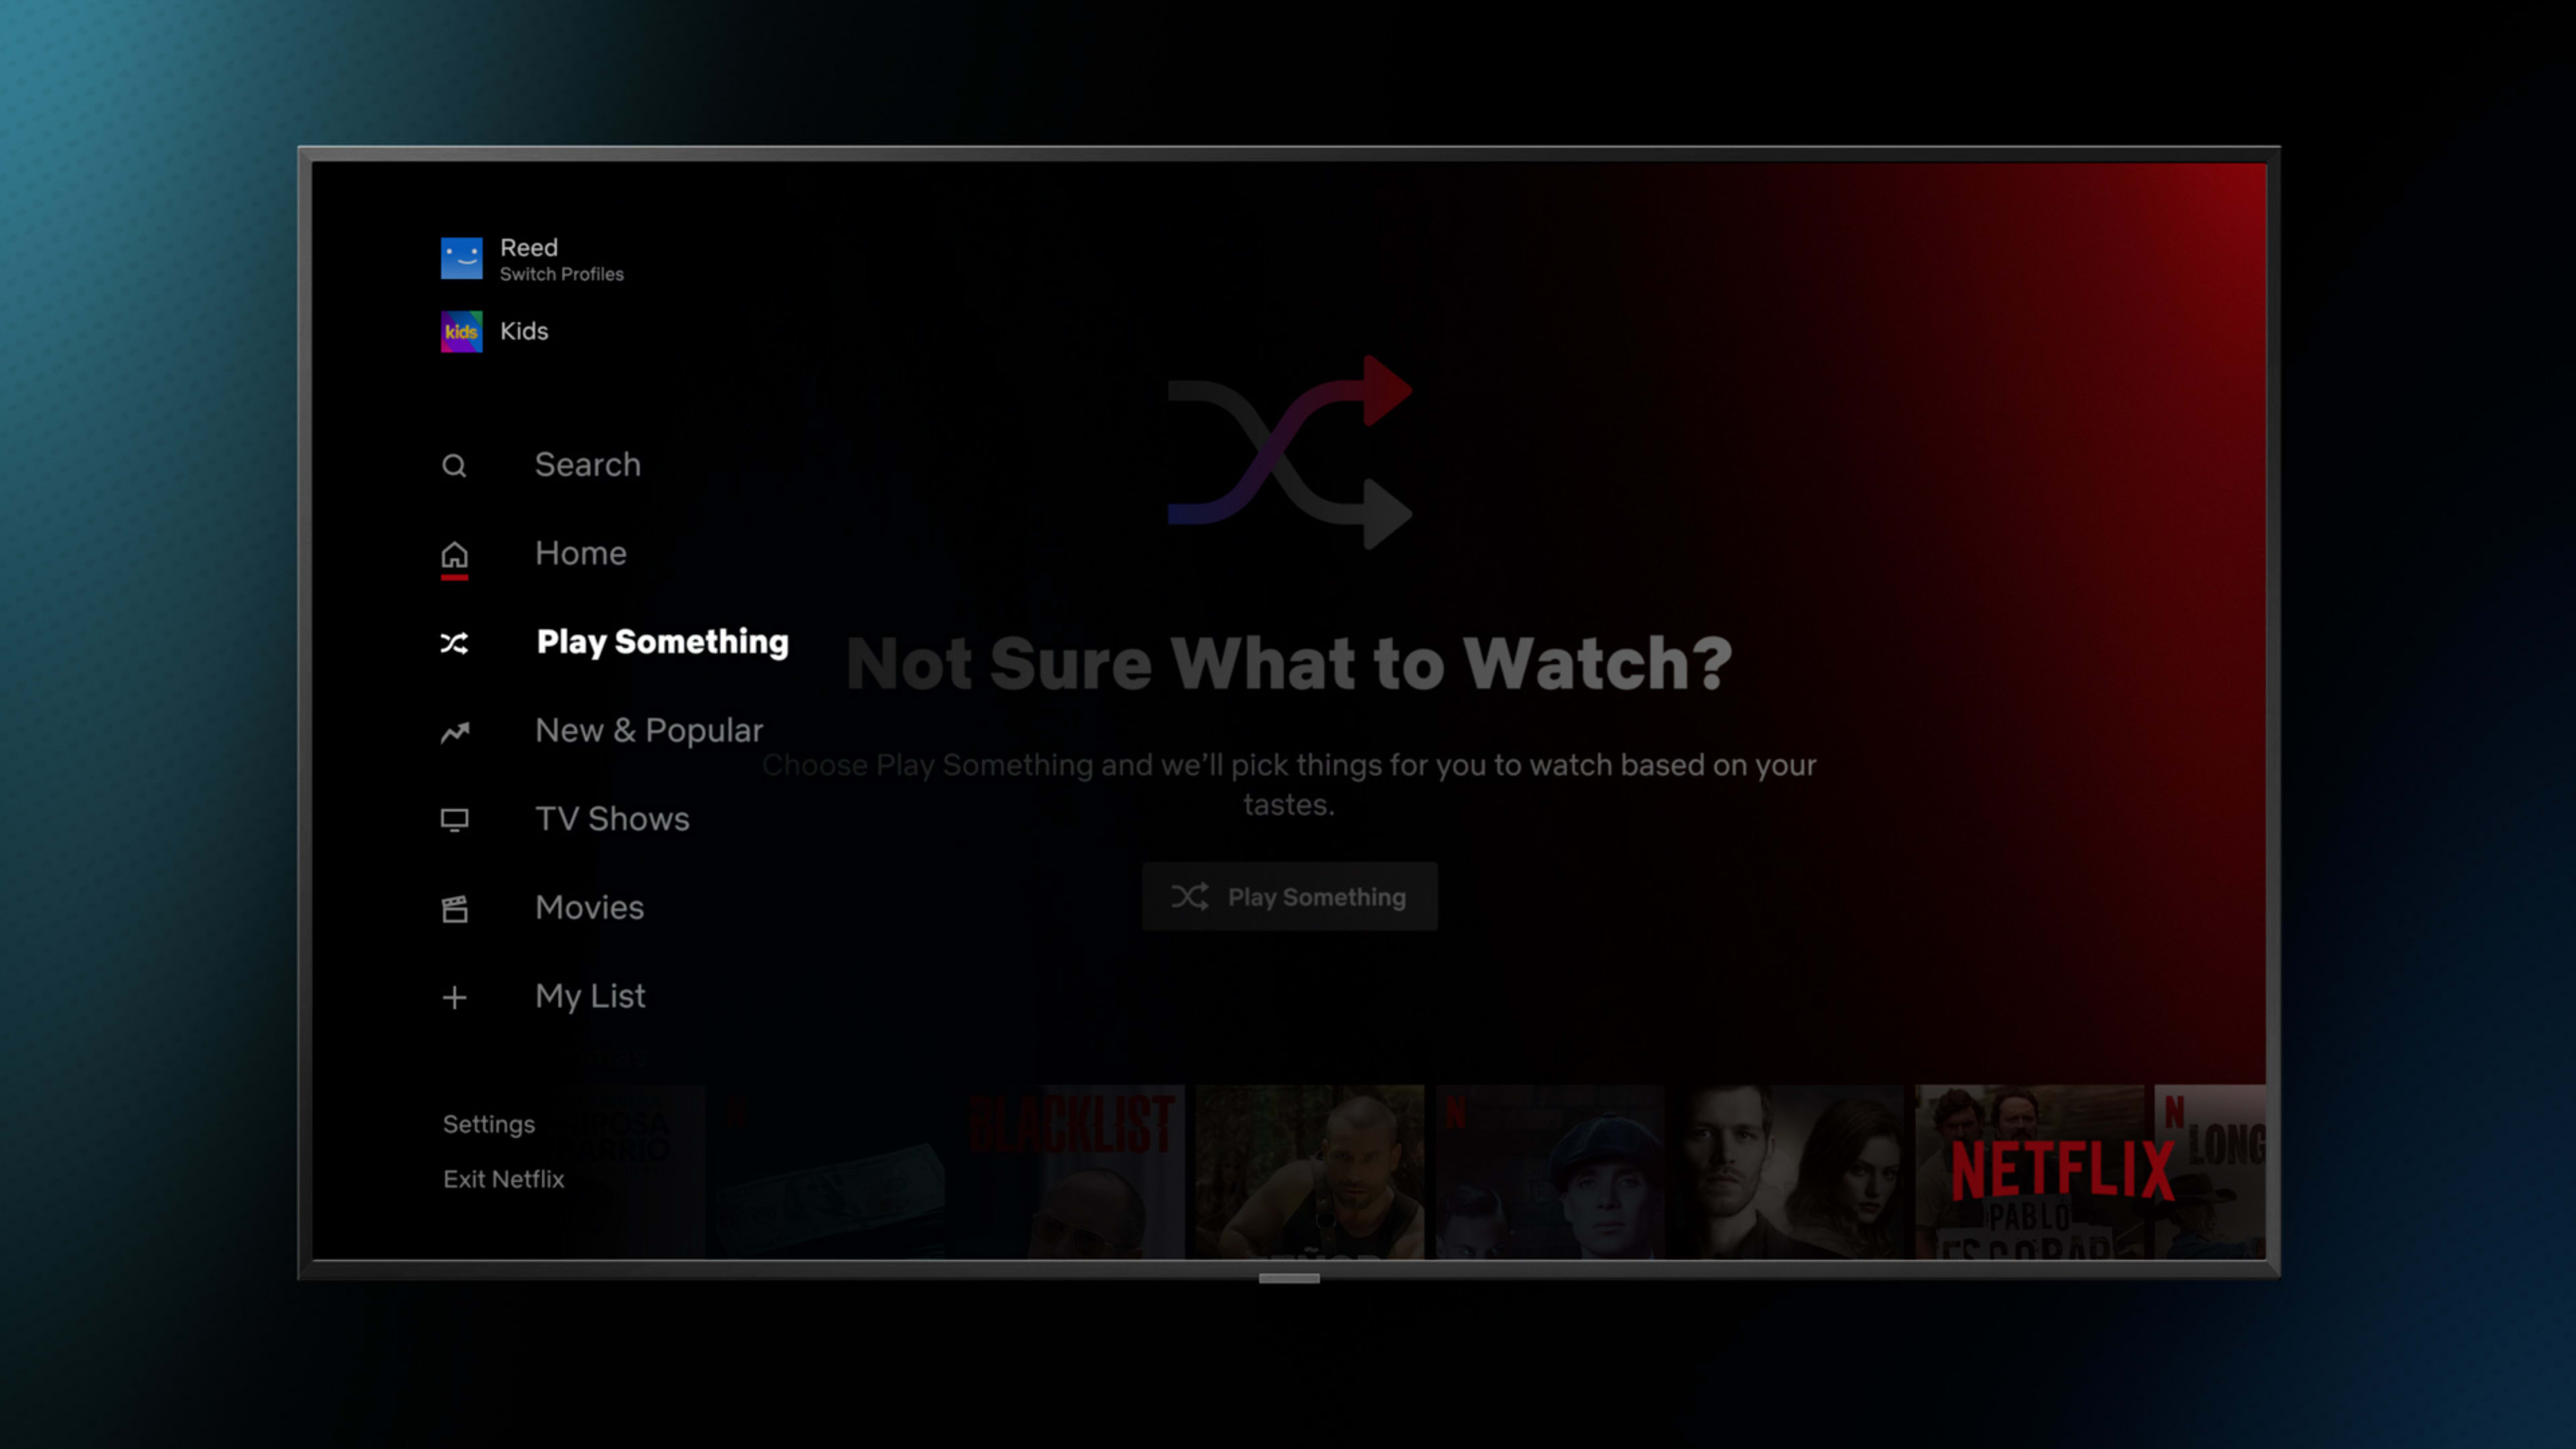 Netflix’s new ‘Play Something’ button is fine, but it’s not enough